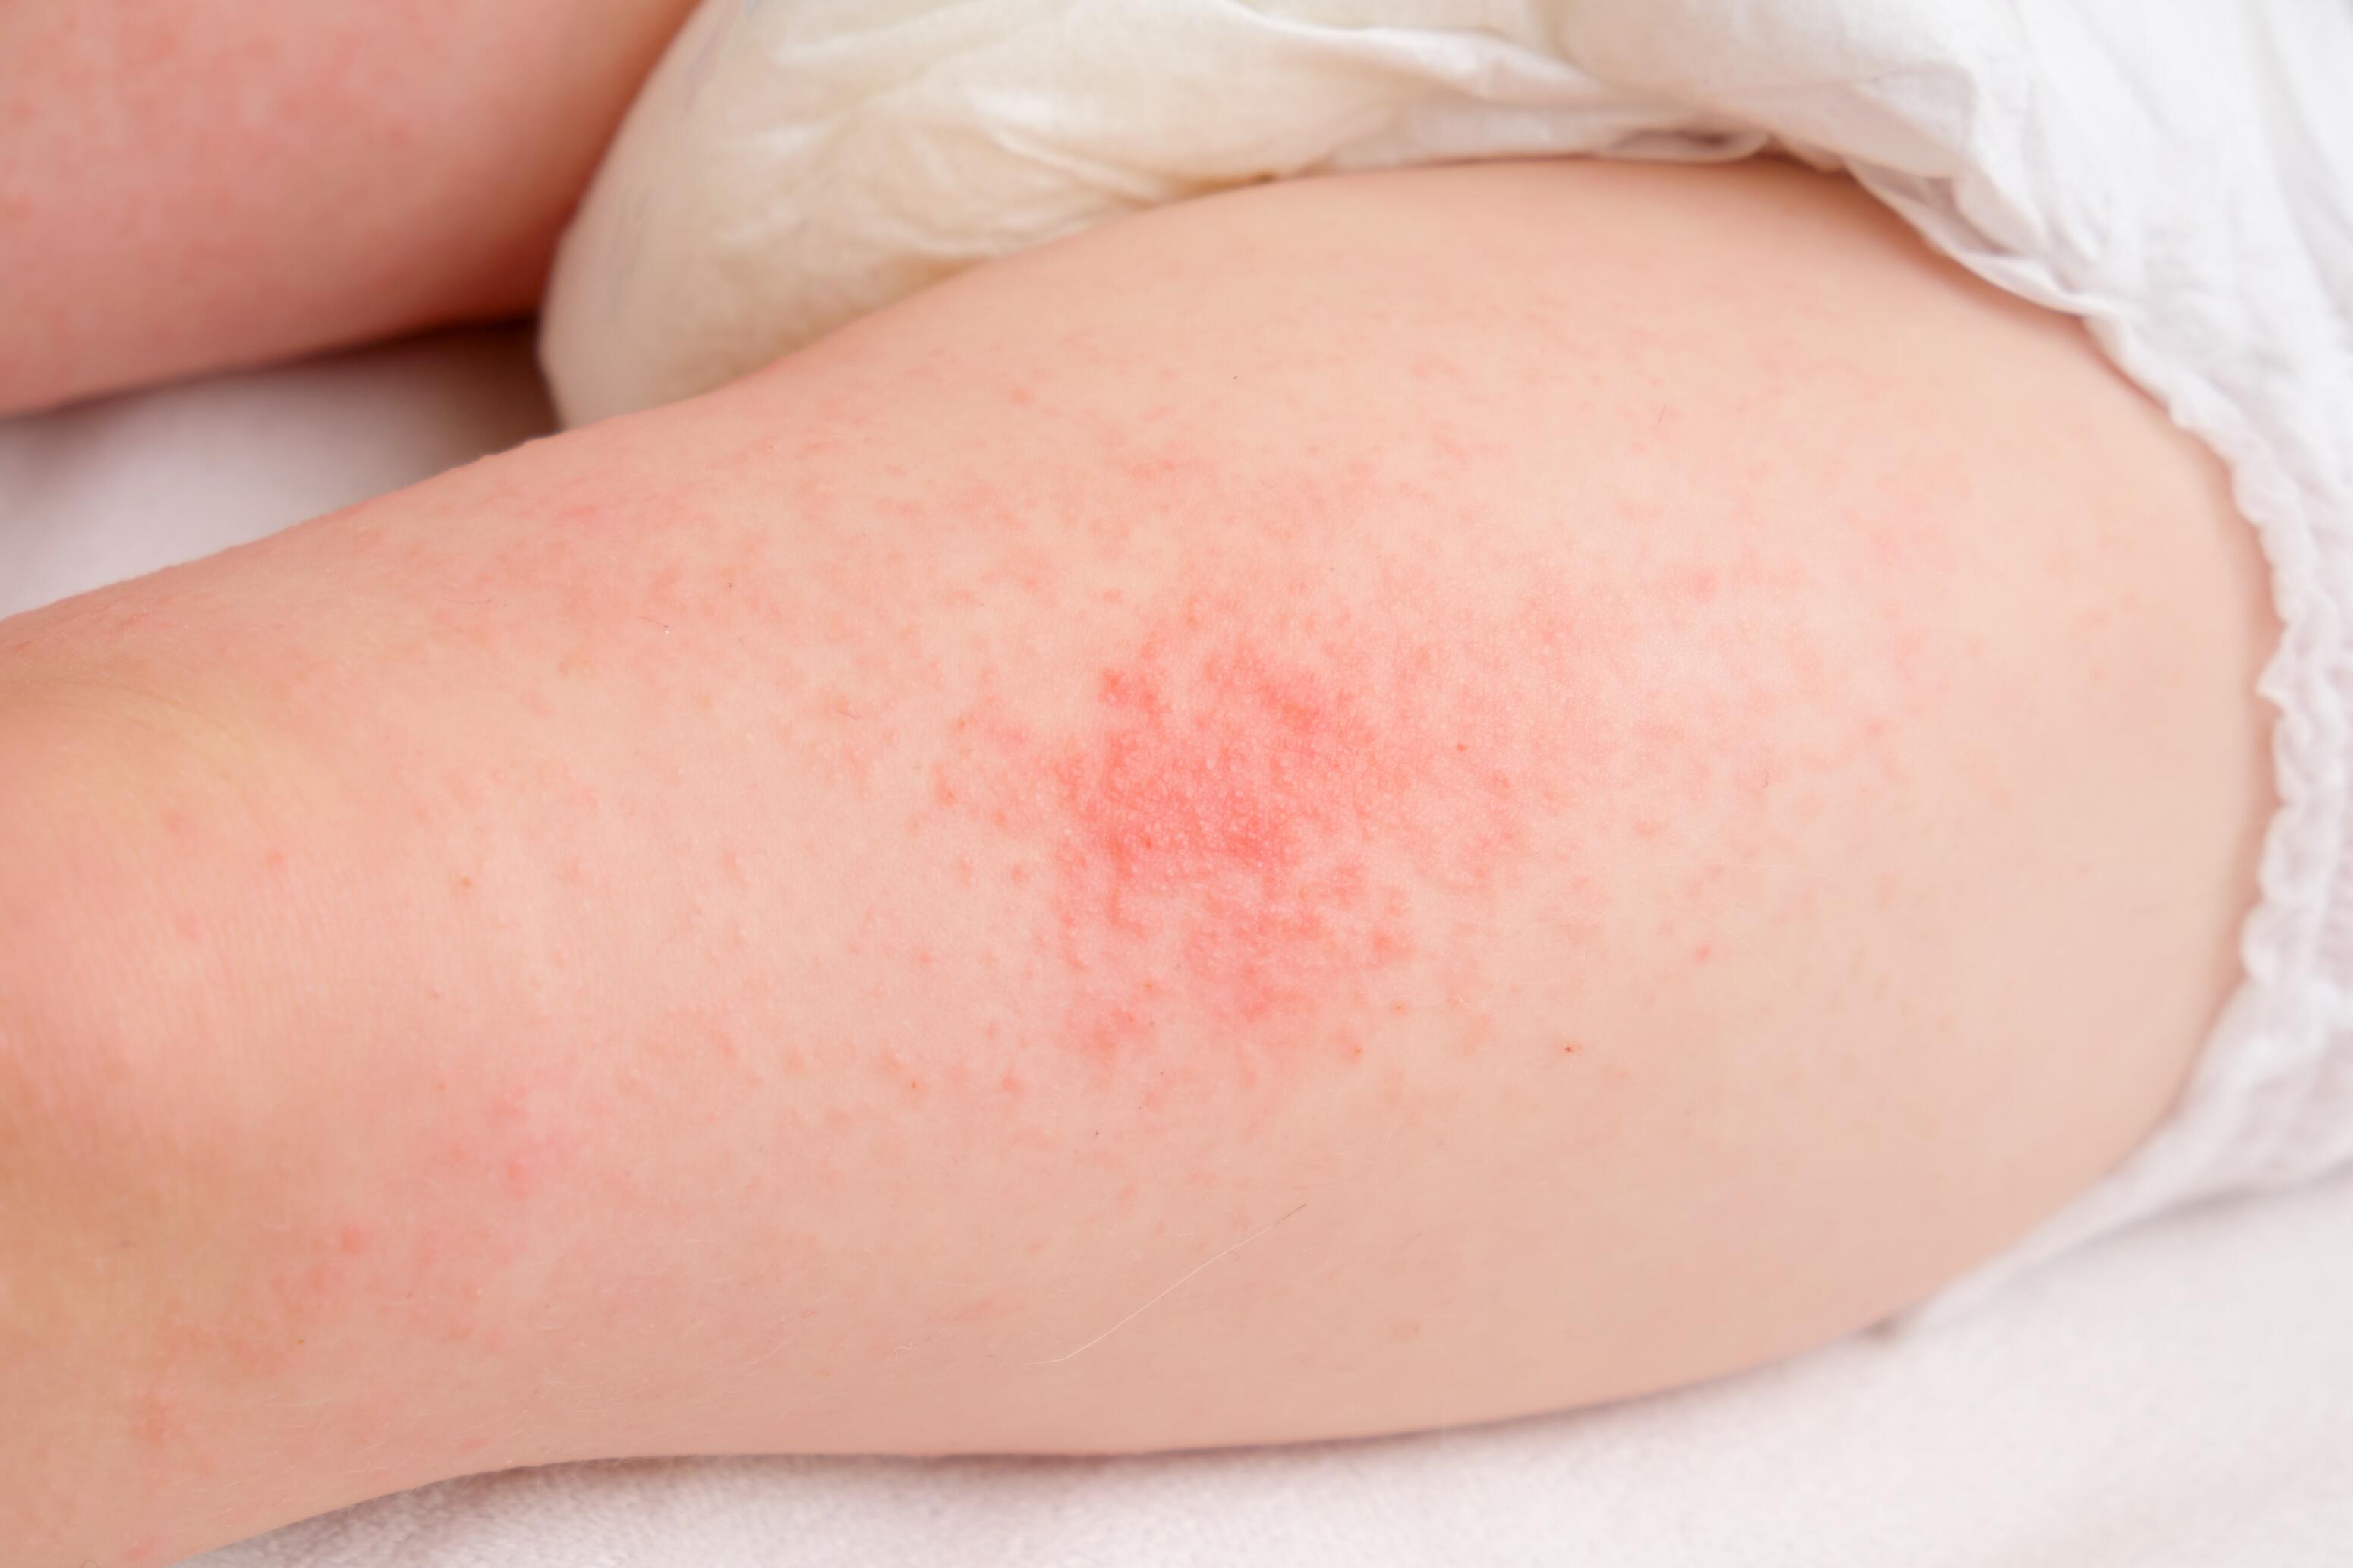 Baby with eczema spots on his leg